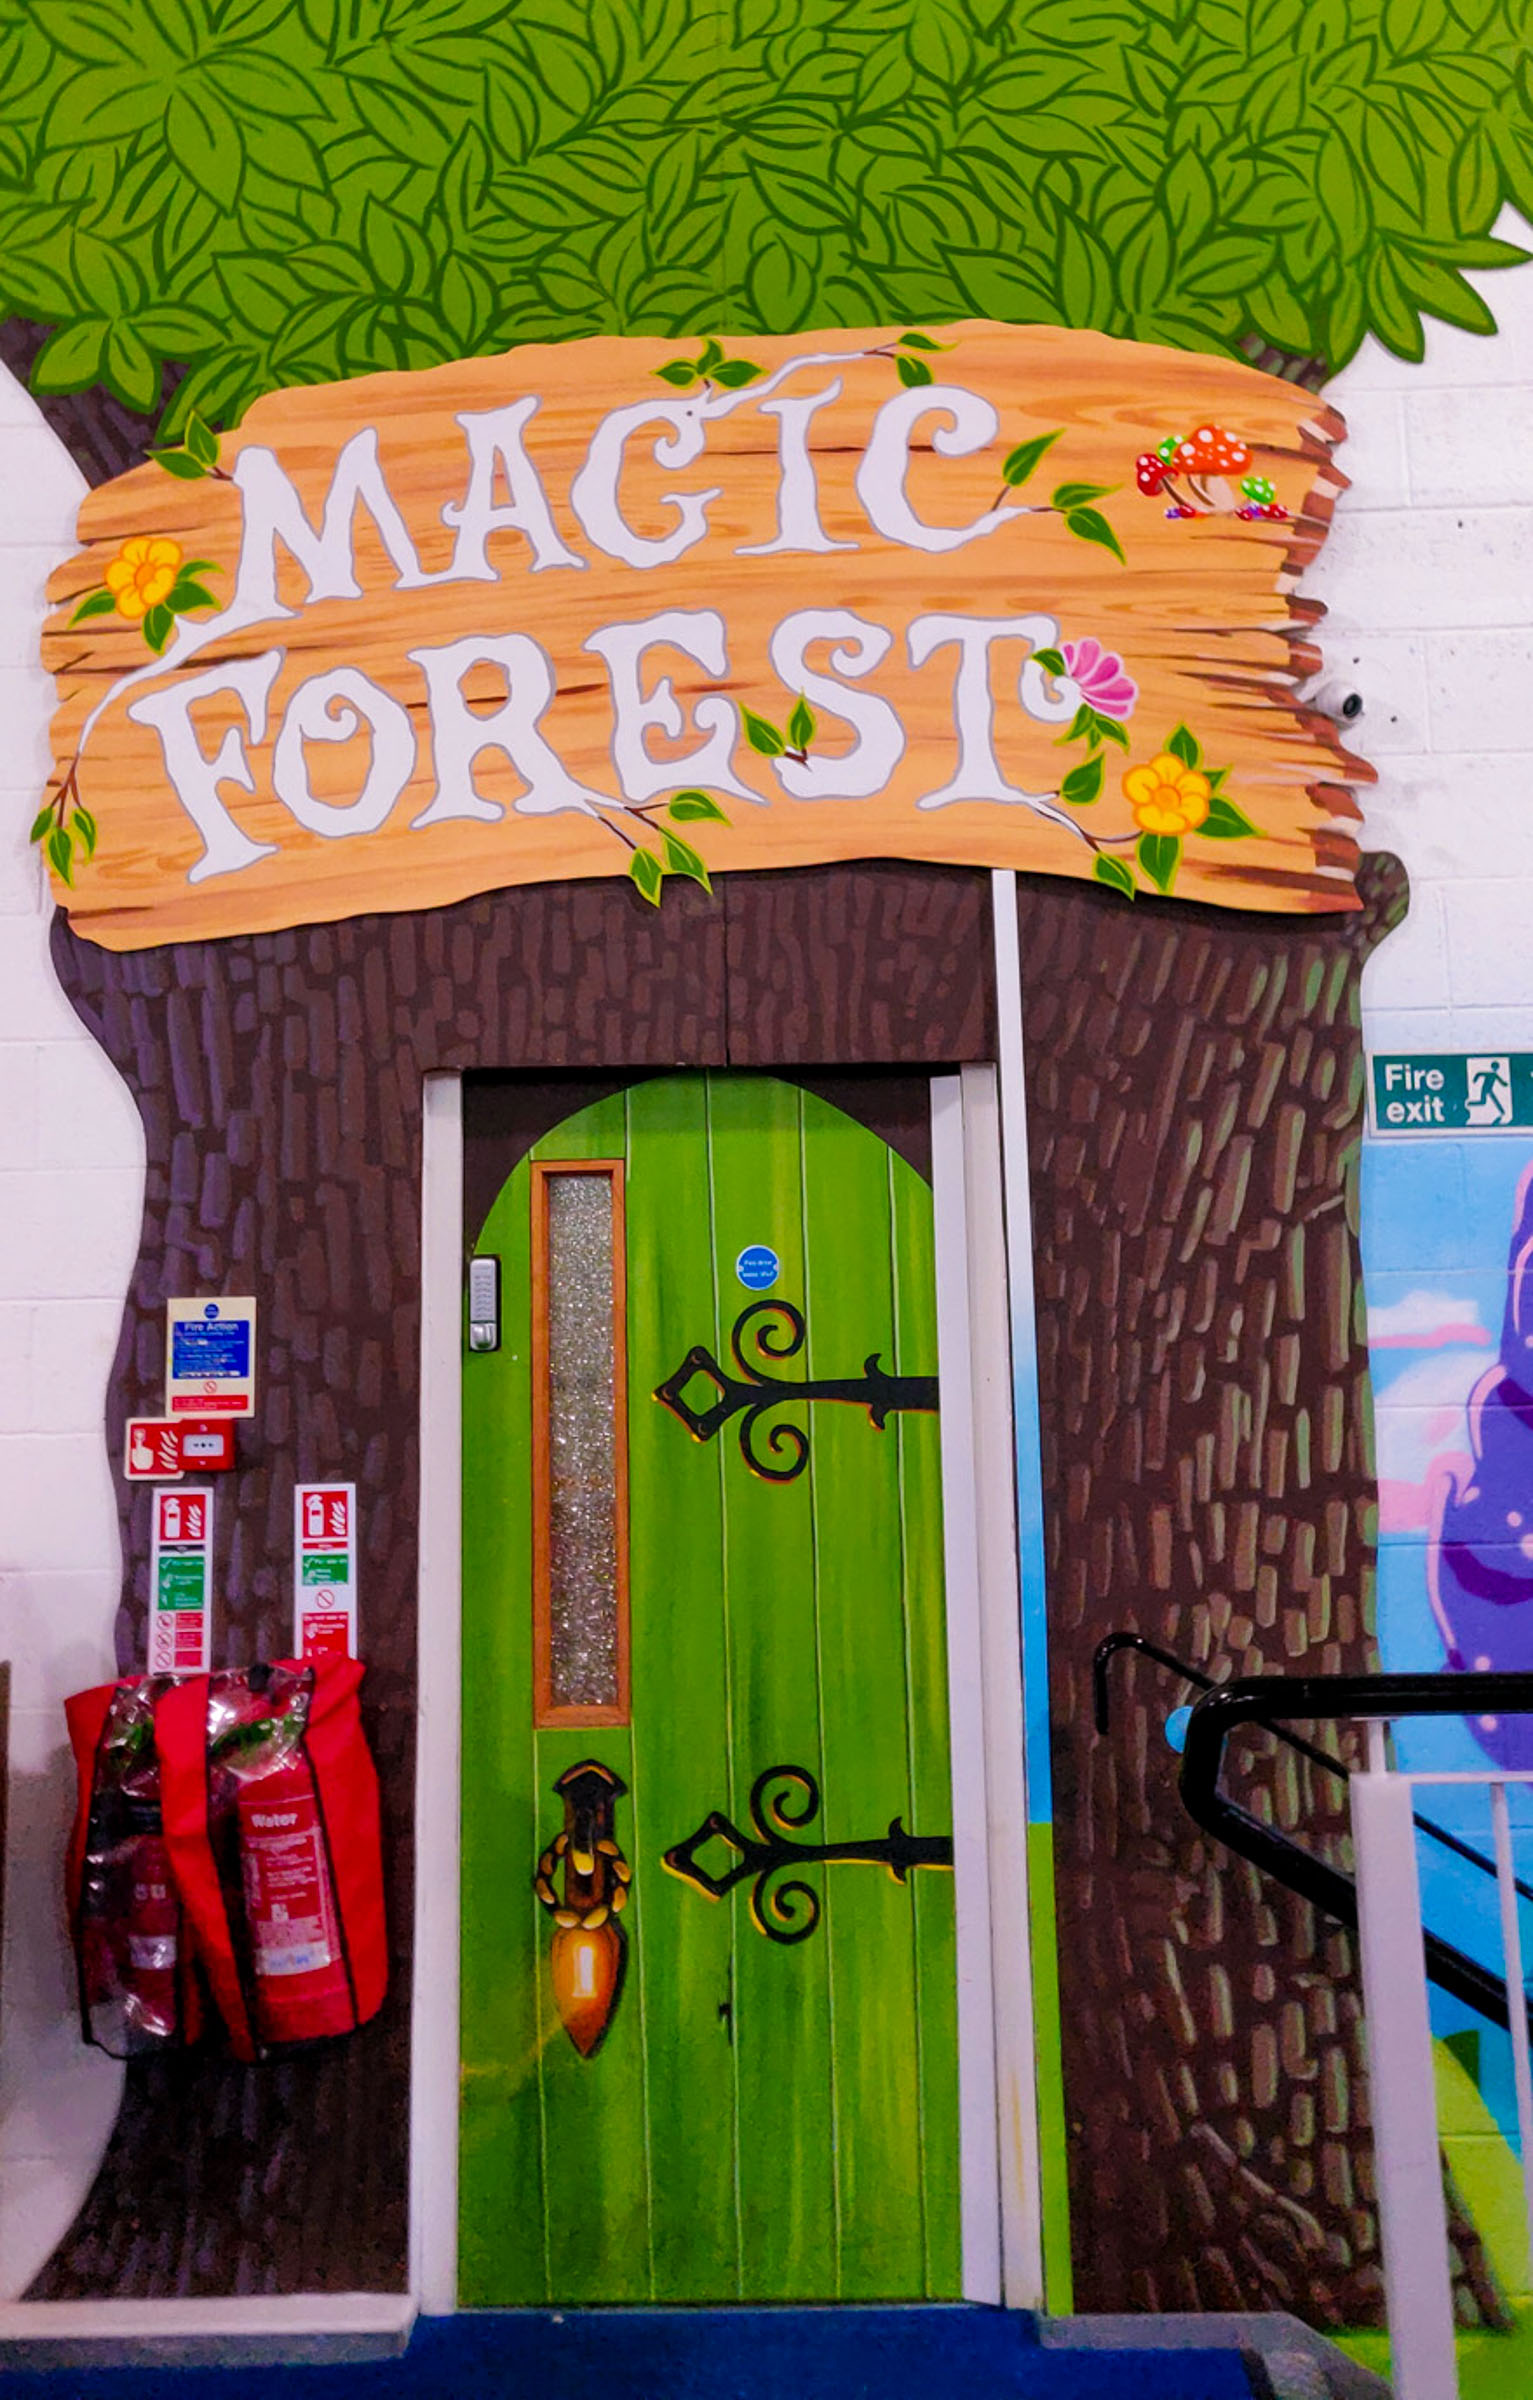 Magic Forest Party Room at the Riverside Hub, Northampton, whole entrance with sign